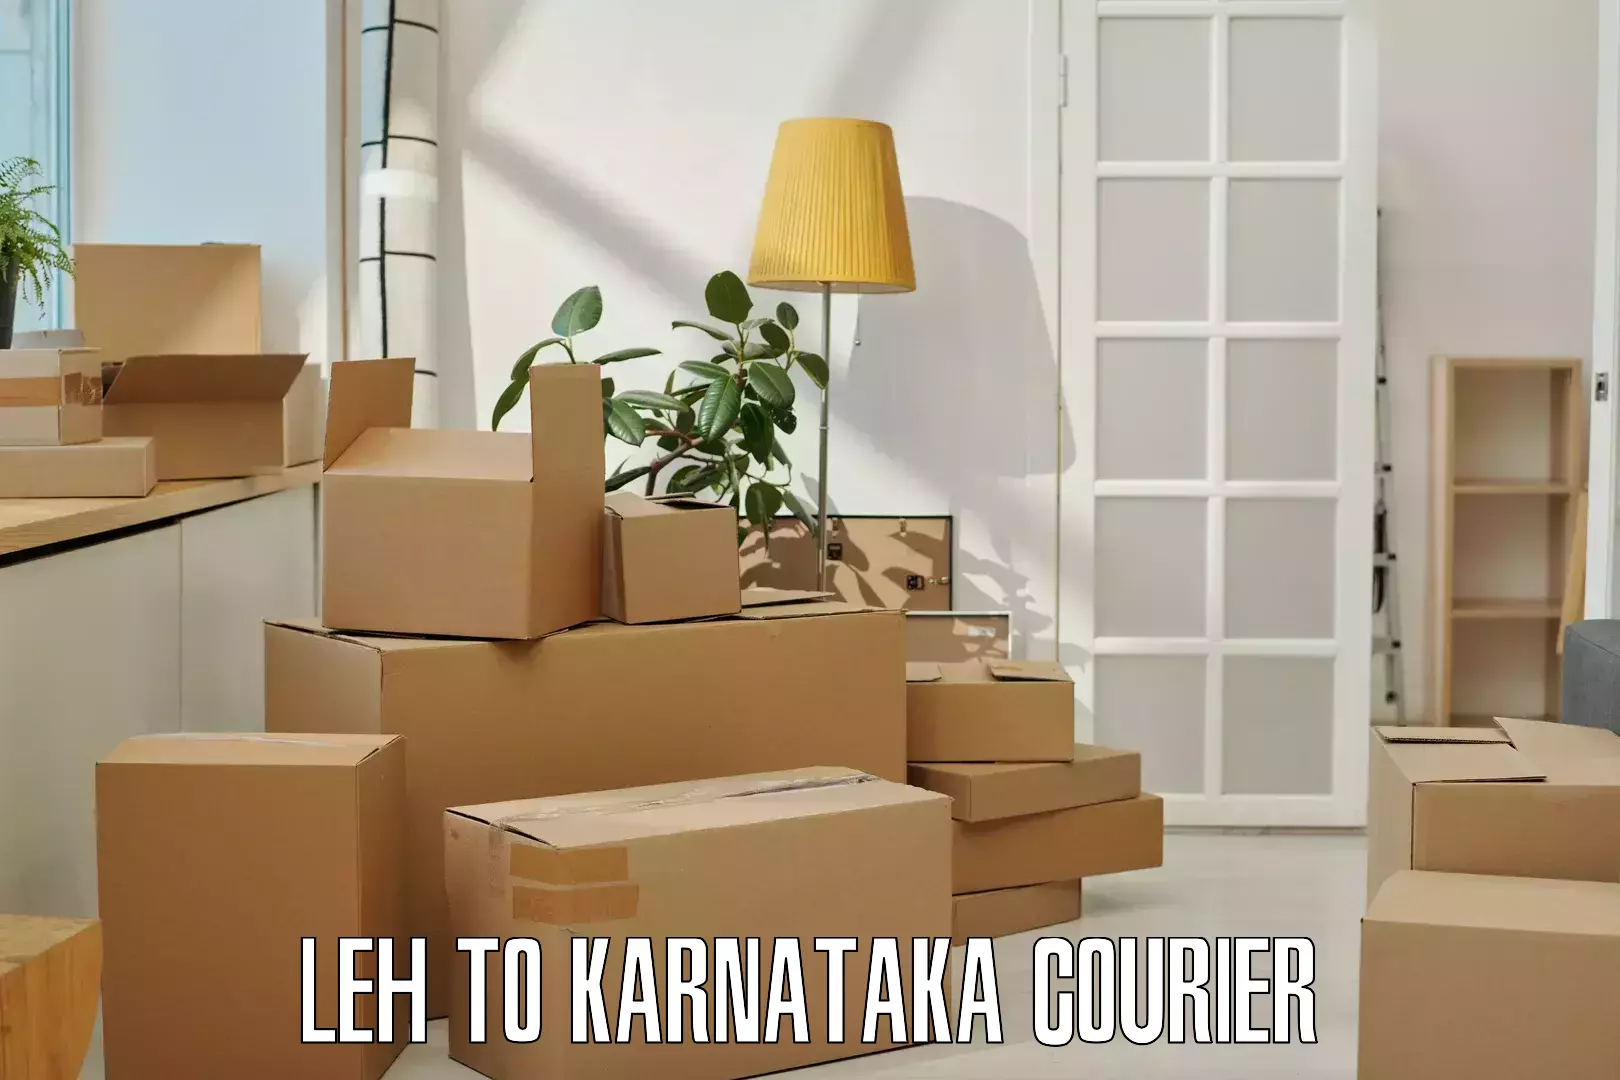 State-of-the-art courier technology Leh to yedrami